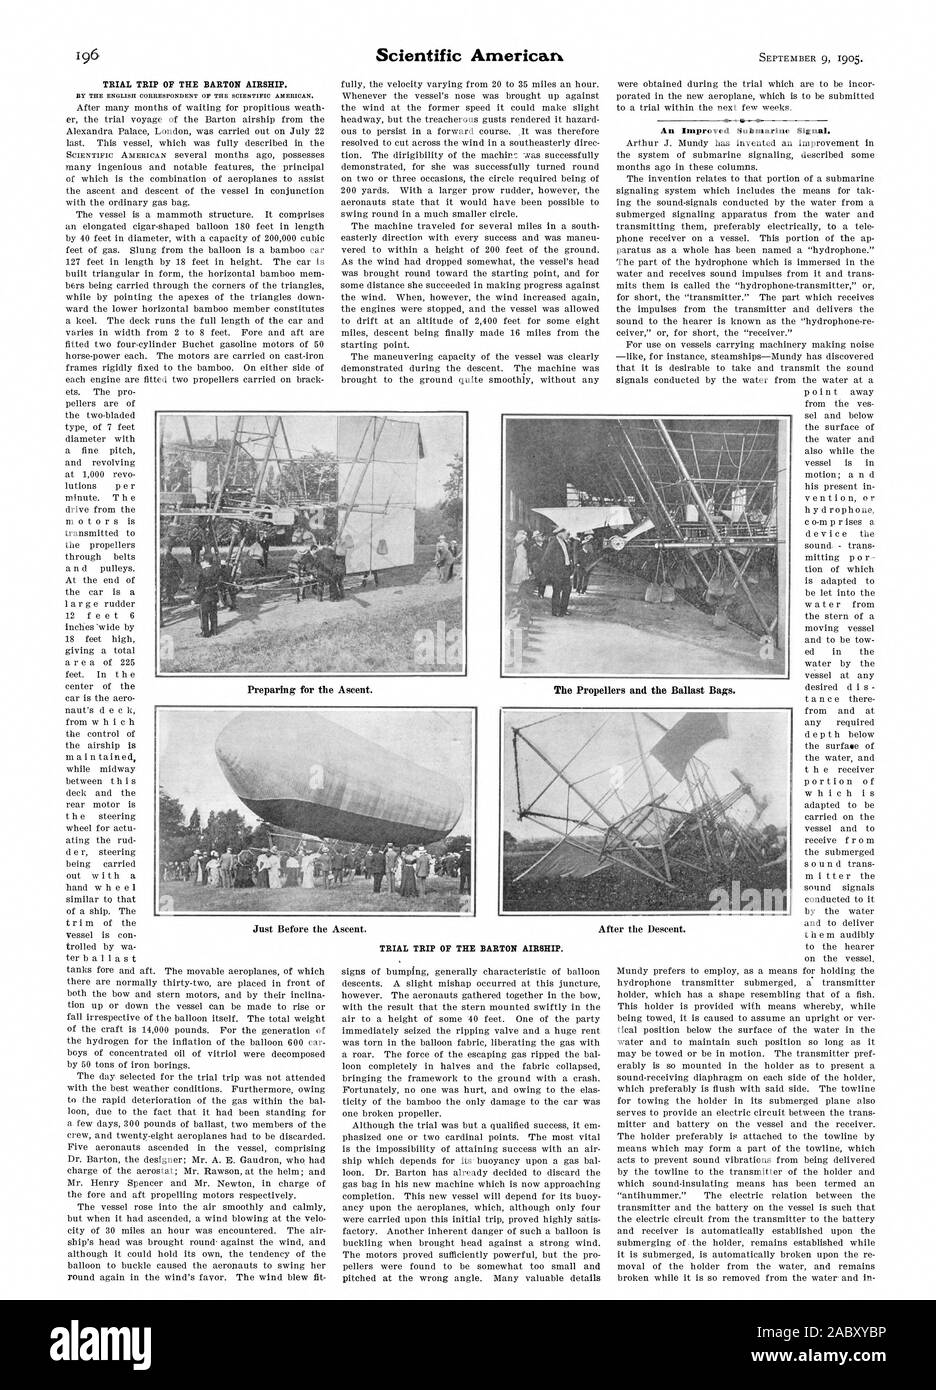 TRIAL TRIP OF THE BARTON AIRSHIP. BY THE ENGLISH CORRESPONDENT OP THE SCIENTIFIC AMERICAN. TRIAL TRIP OF THE BARTON AIRSHIP An Improved Submarine Signal., 05-09-09 Stock Photo